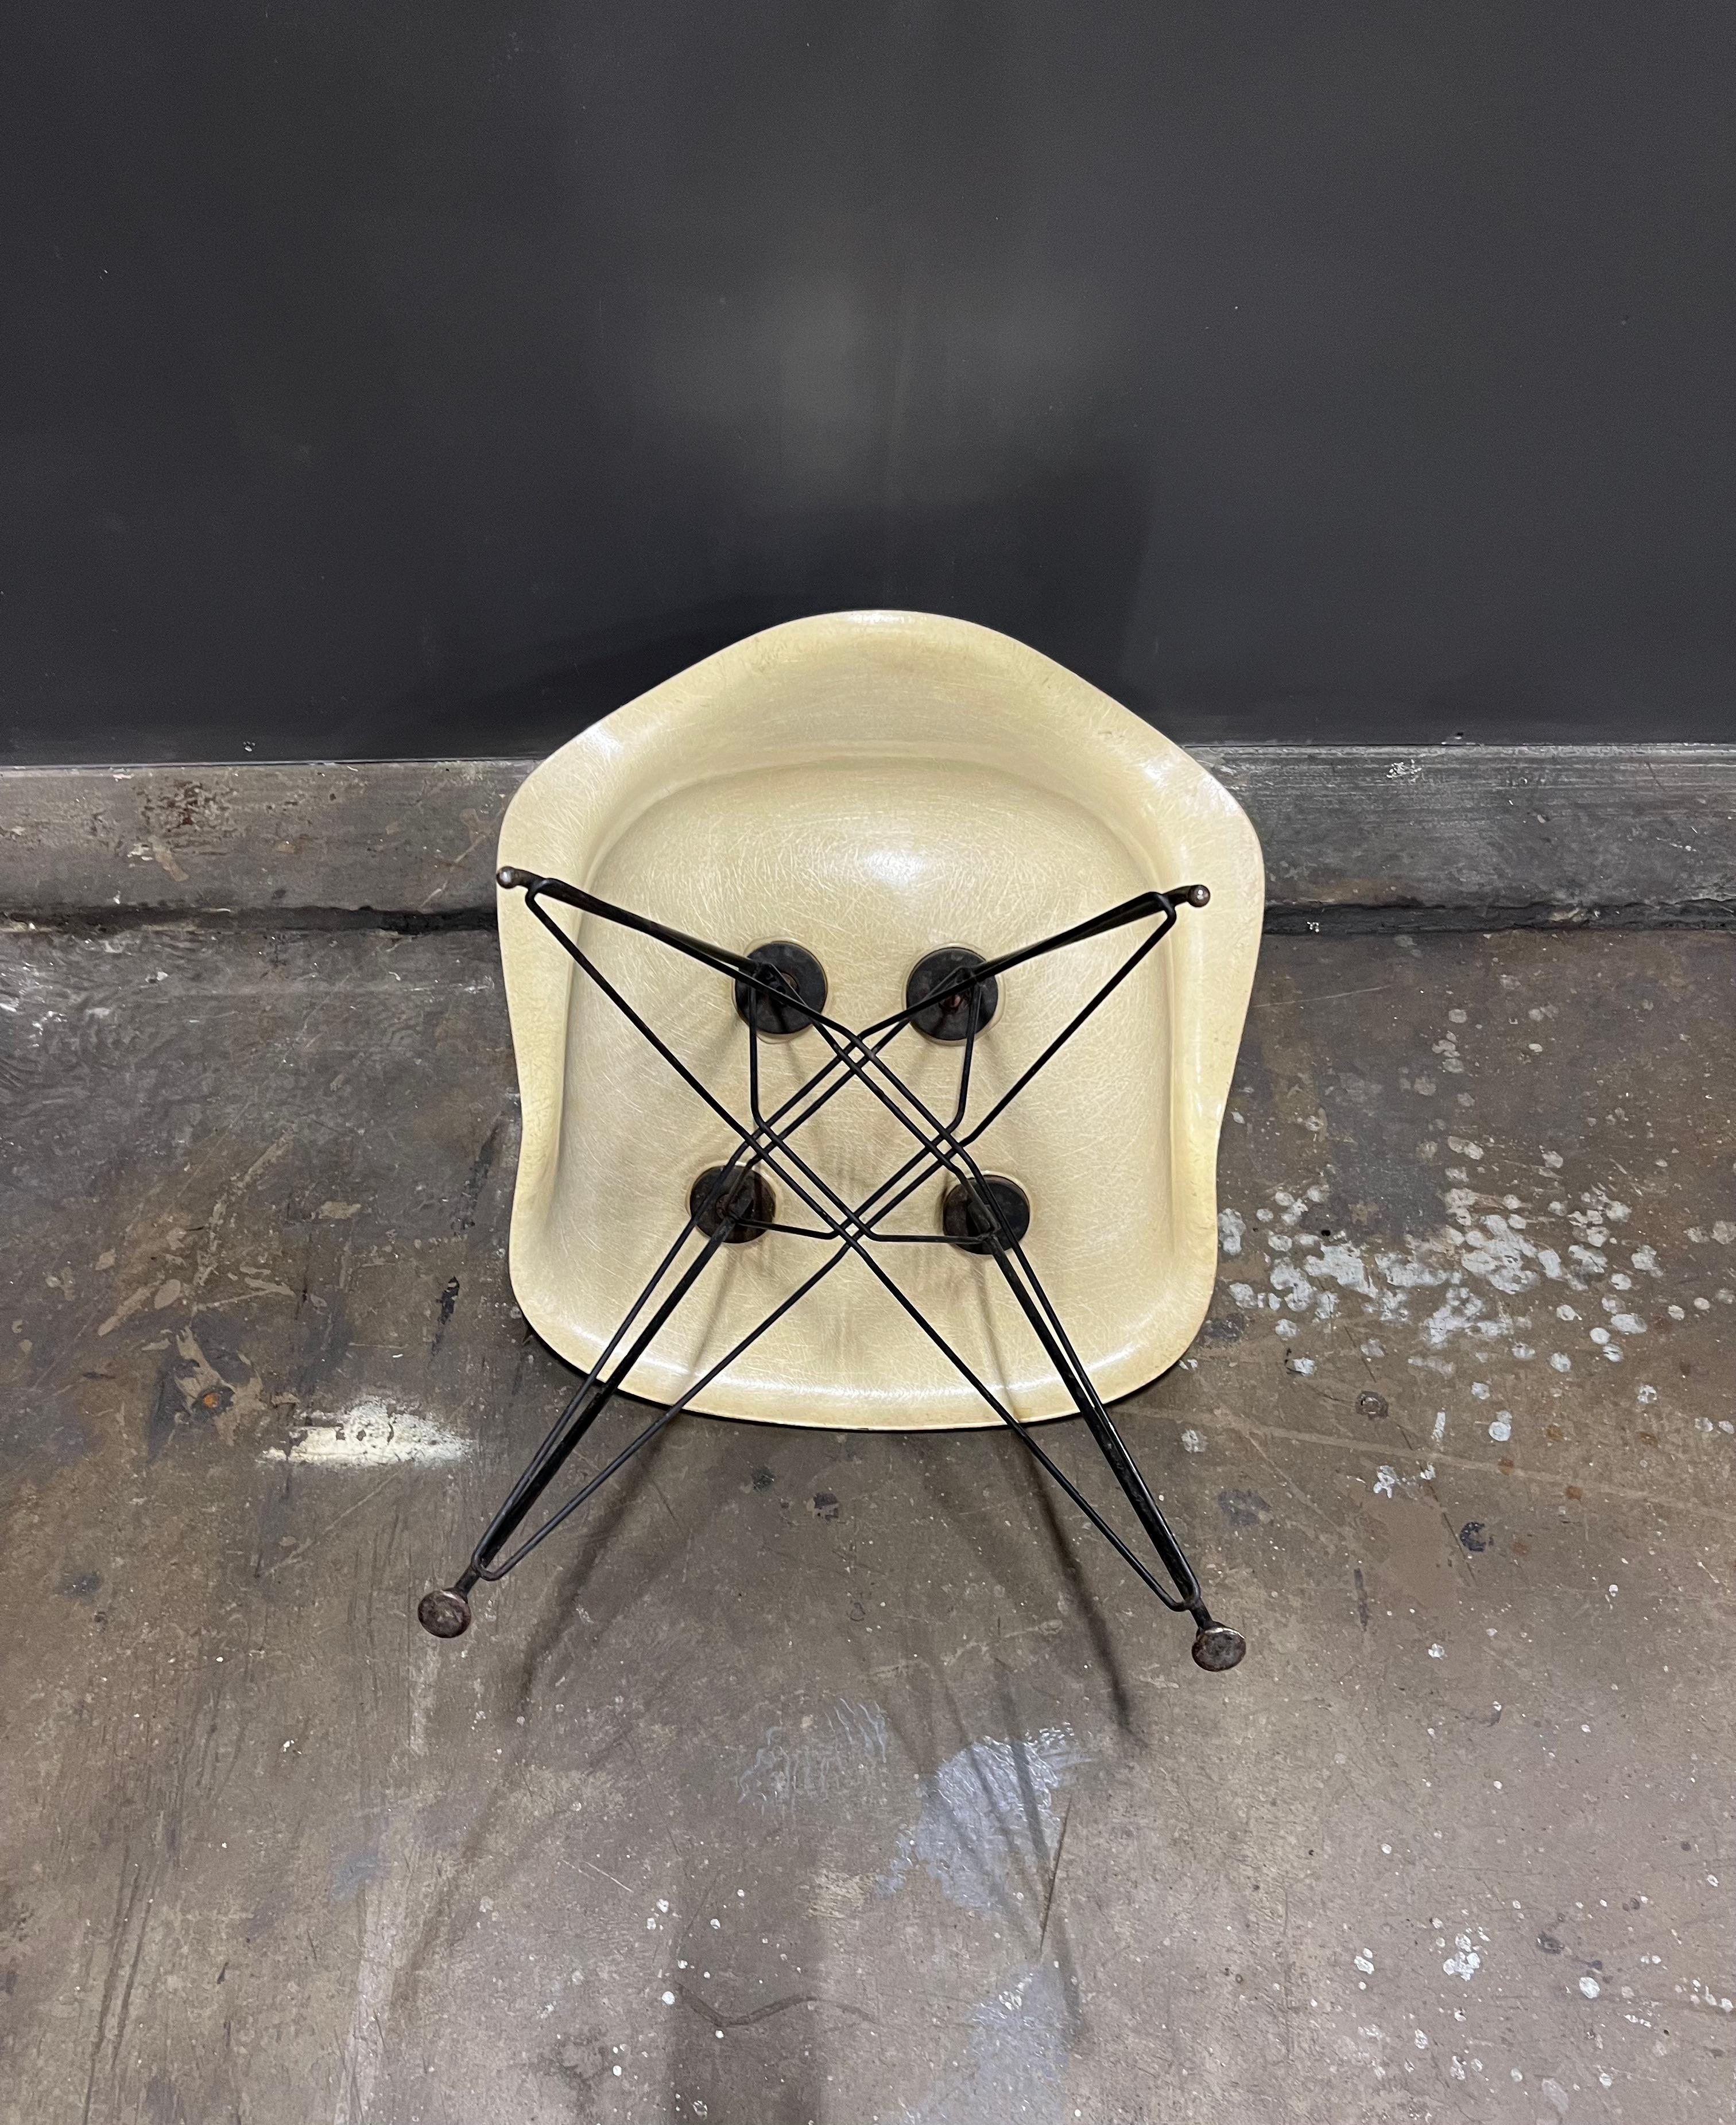 Steel Second Generation All Original Eames Fiberglass with Dar Eiffel Tower Base For Sale